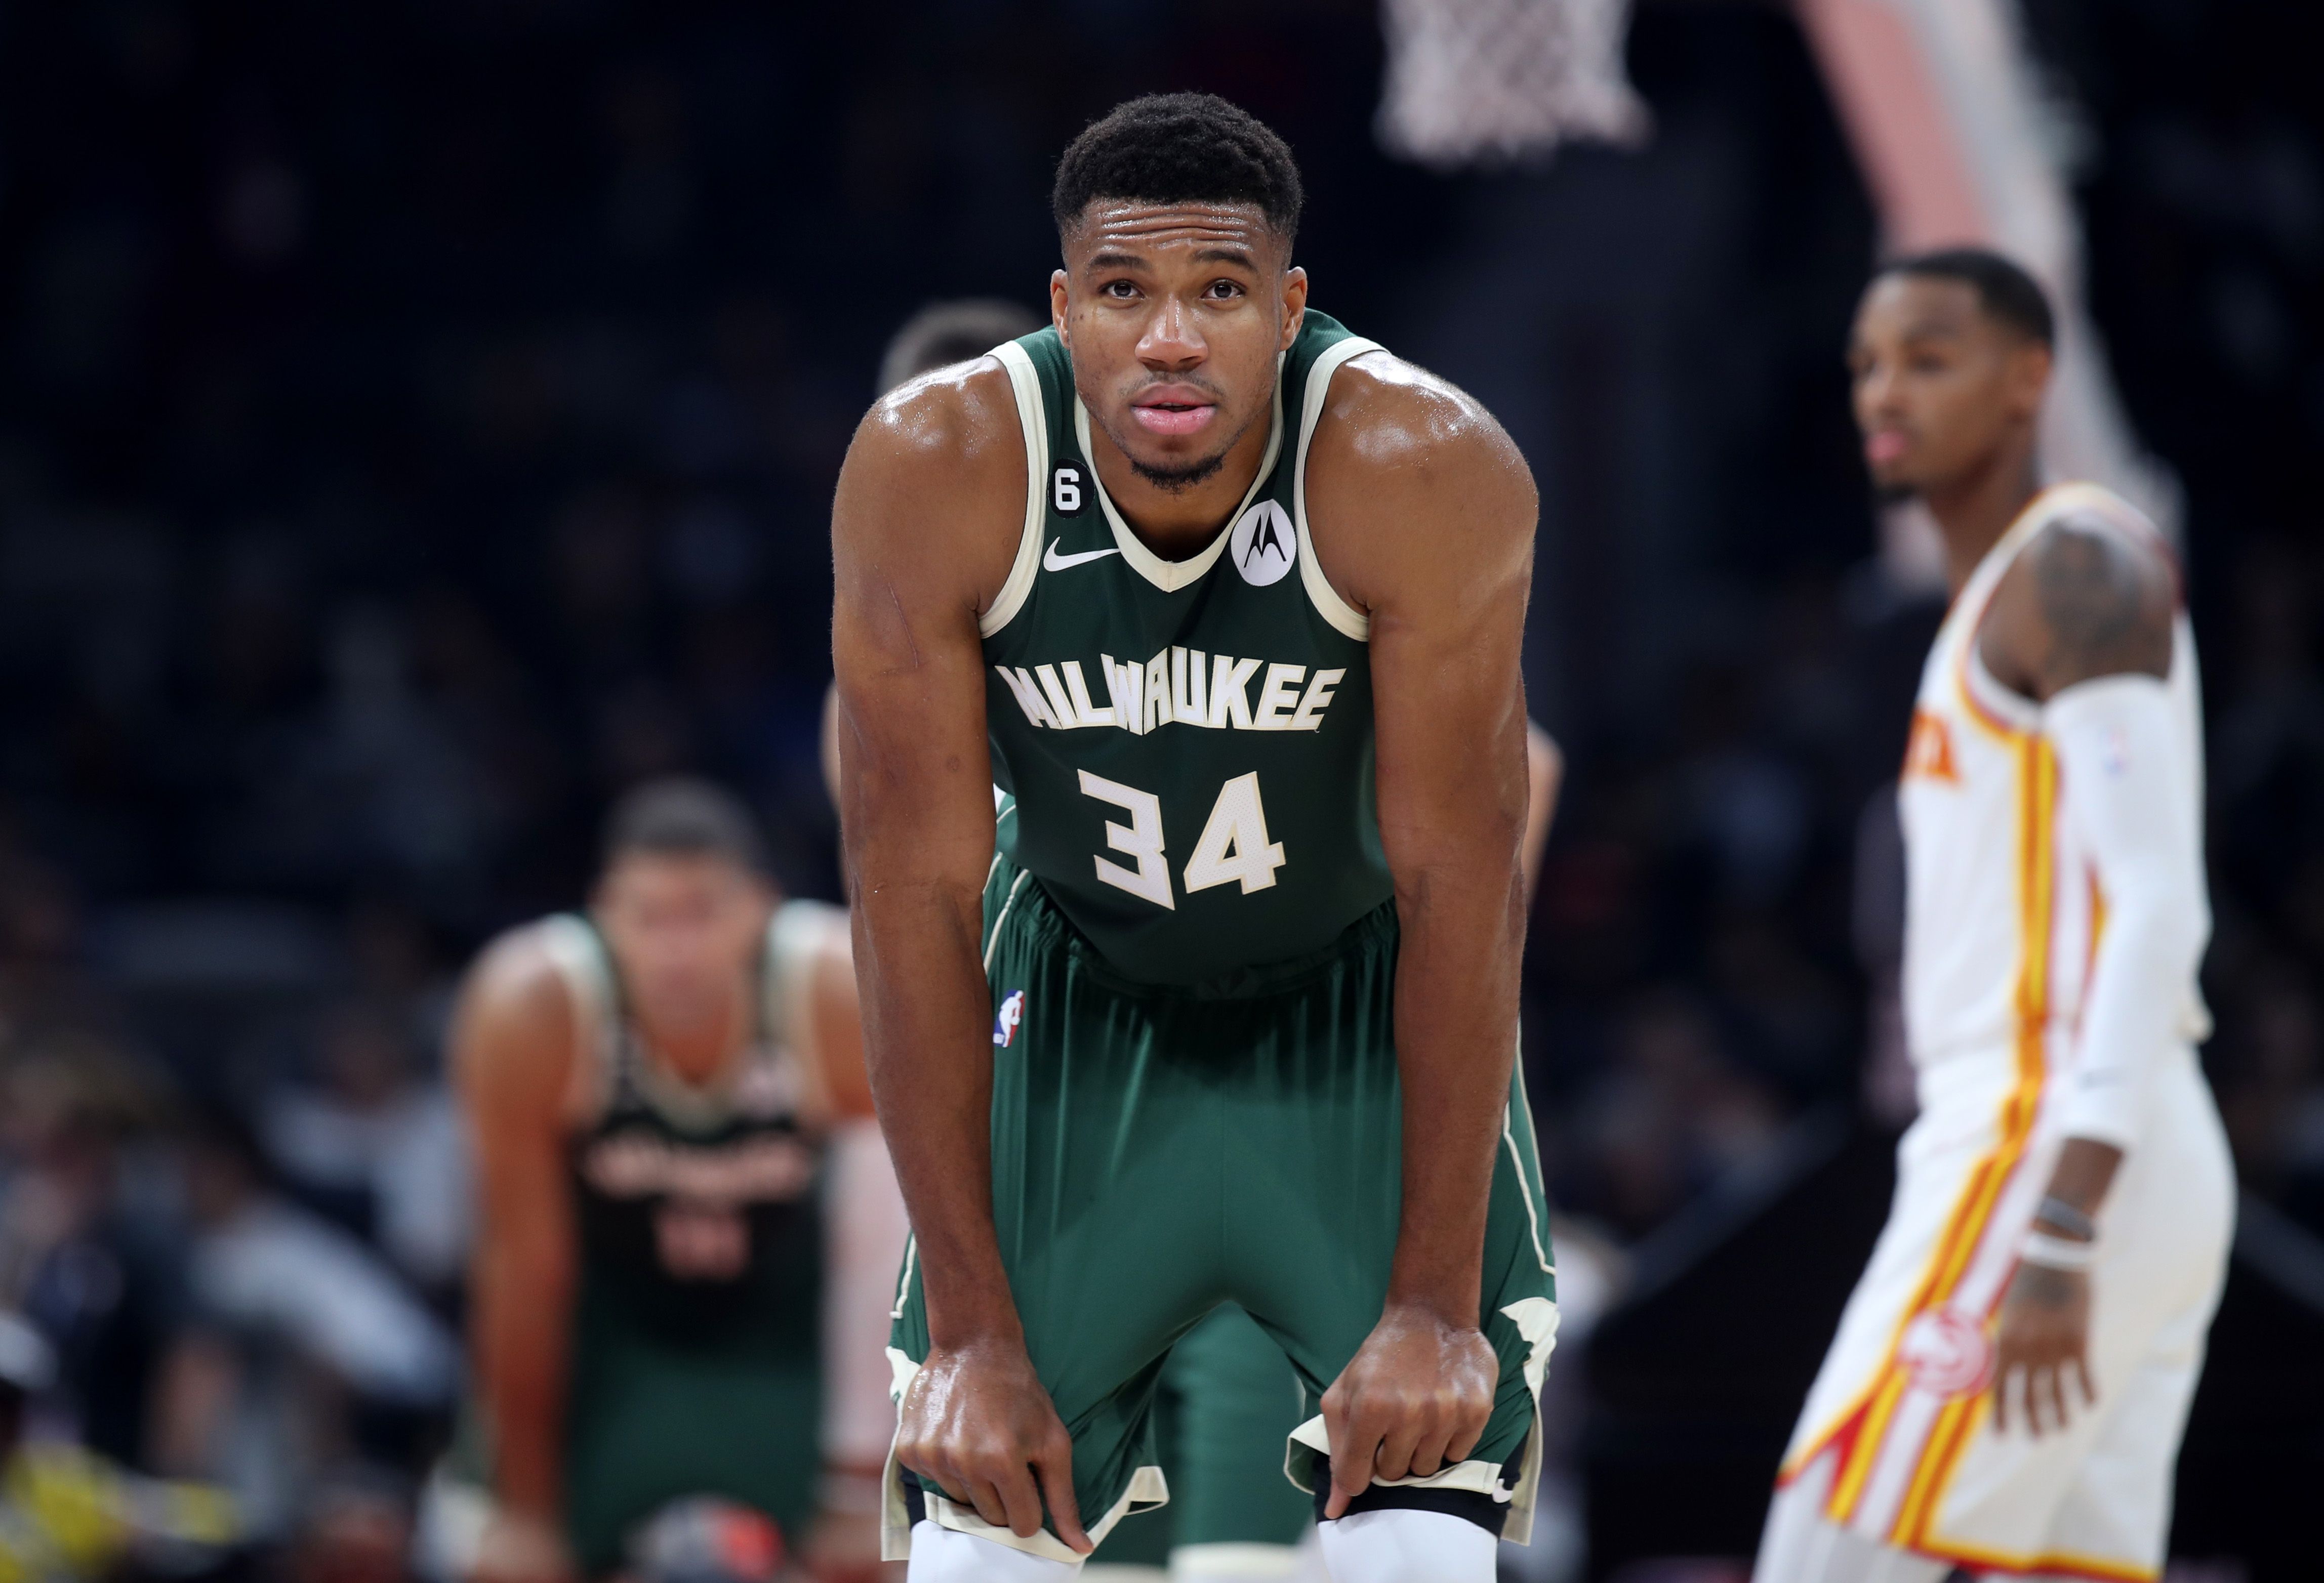 Giannis Antetokounmpo looks dejected after the Milwaukee Bucks lose to the Atlanta Hawks on the NBA's debut in the Middle East